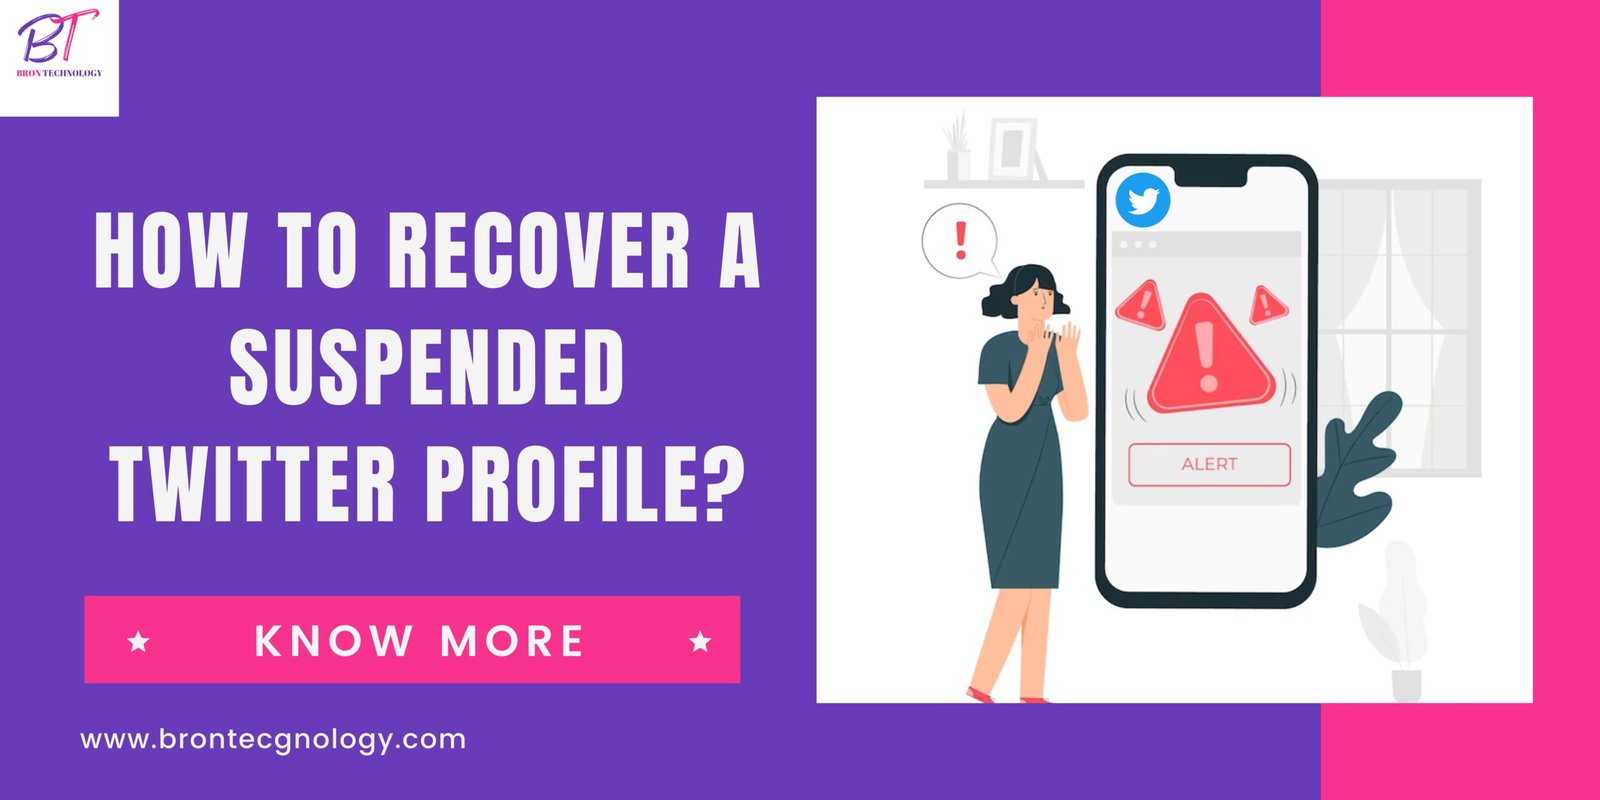 How to Recover a Suspended Twitter Profile